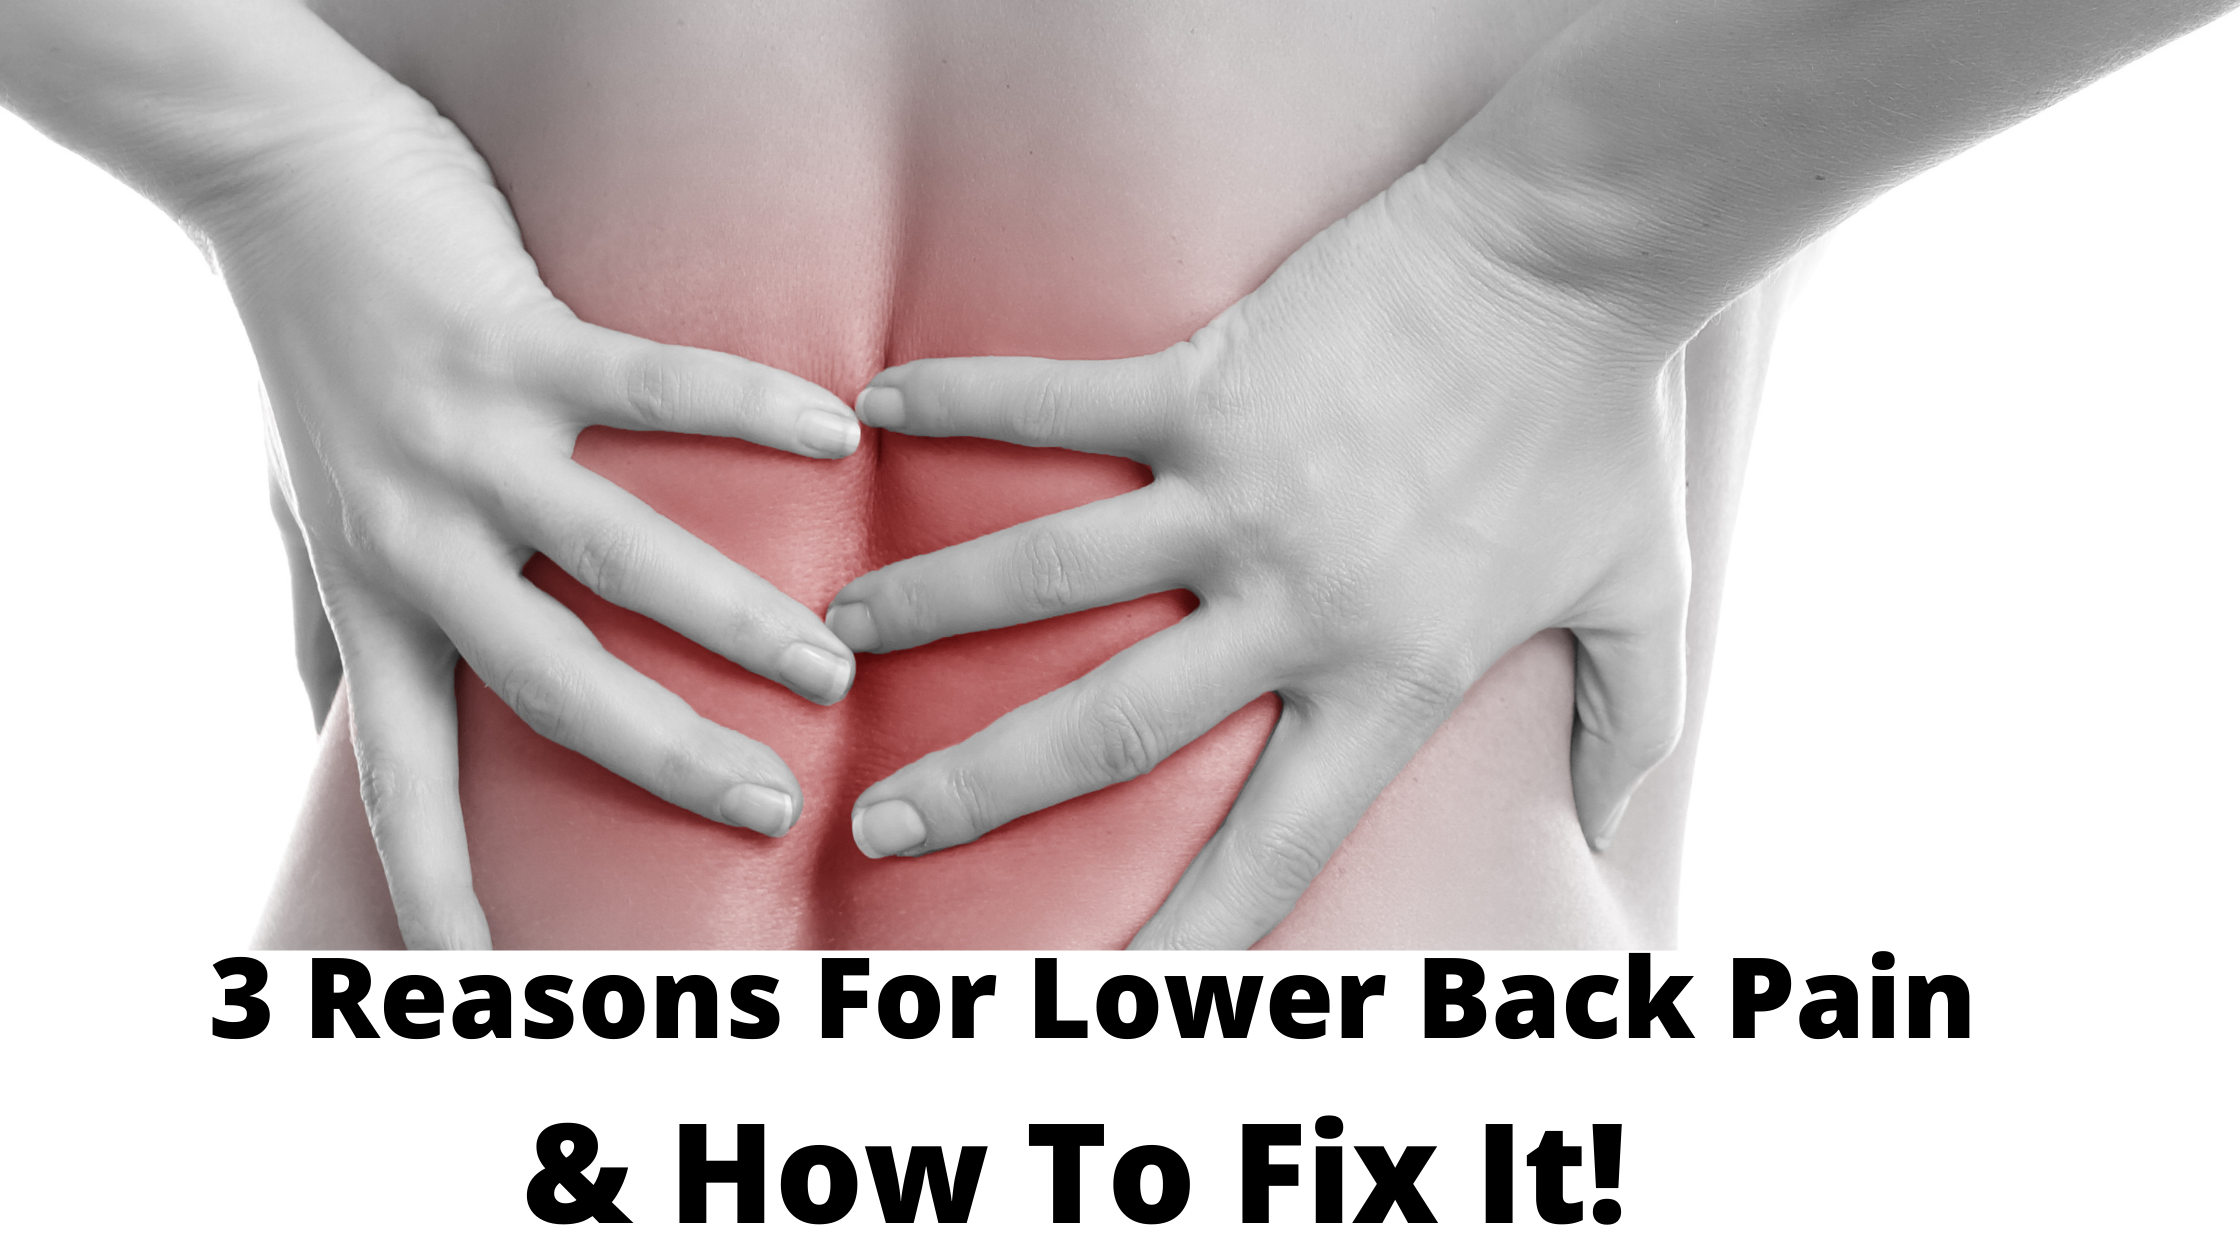 Three Reasons for Lower Back Pain & How to Fix It